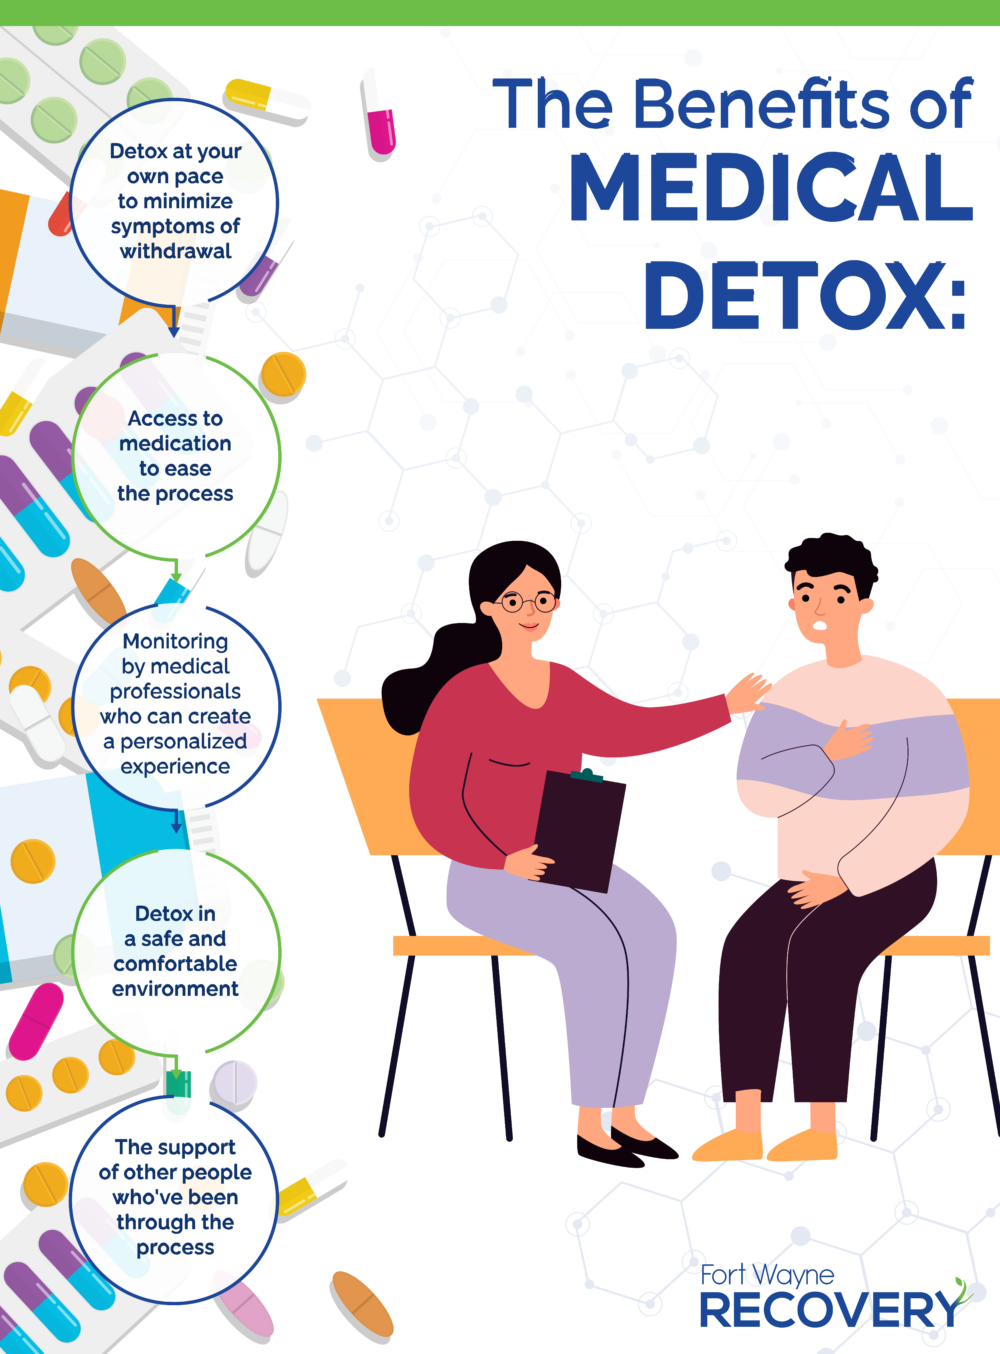 Benefits of Medical Detox Infographic Fort Wayne Recovery